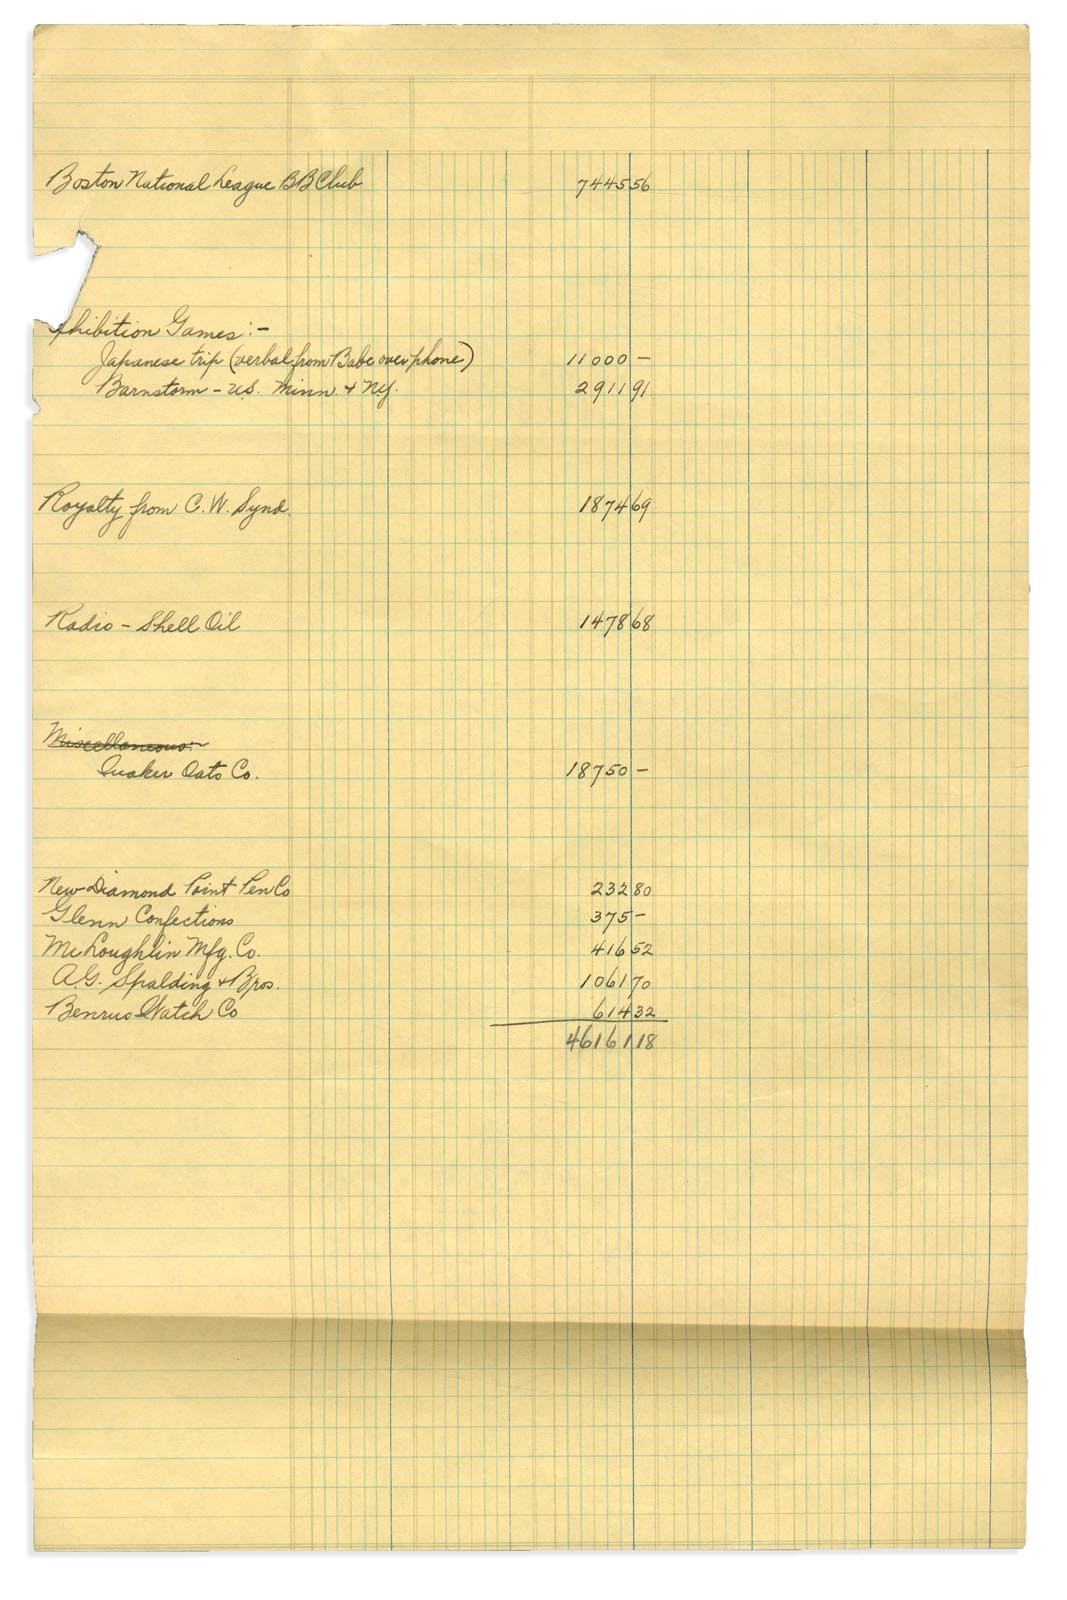 - "Babe Ruth Was Paid $11,000 for 1934 Tour of Japan" Document